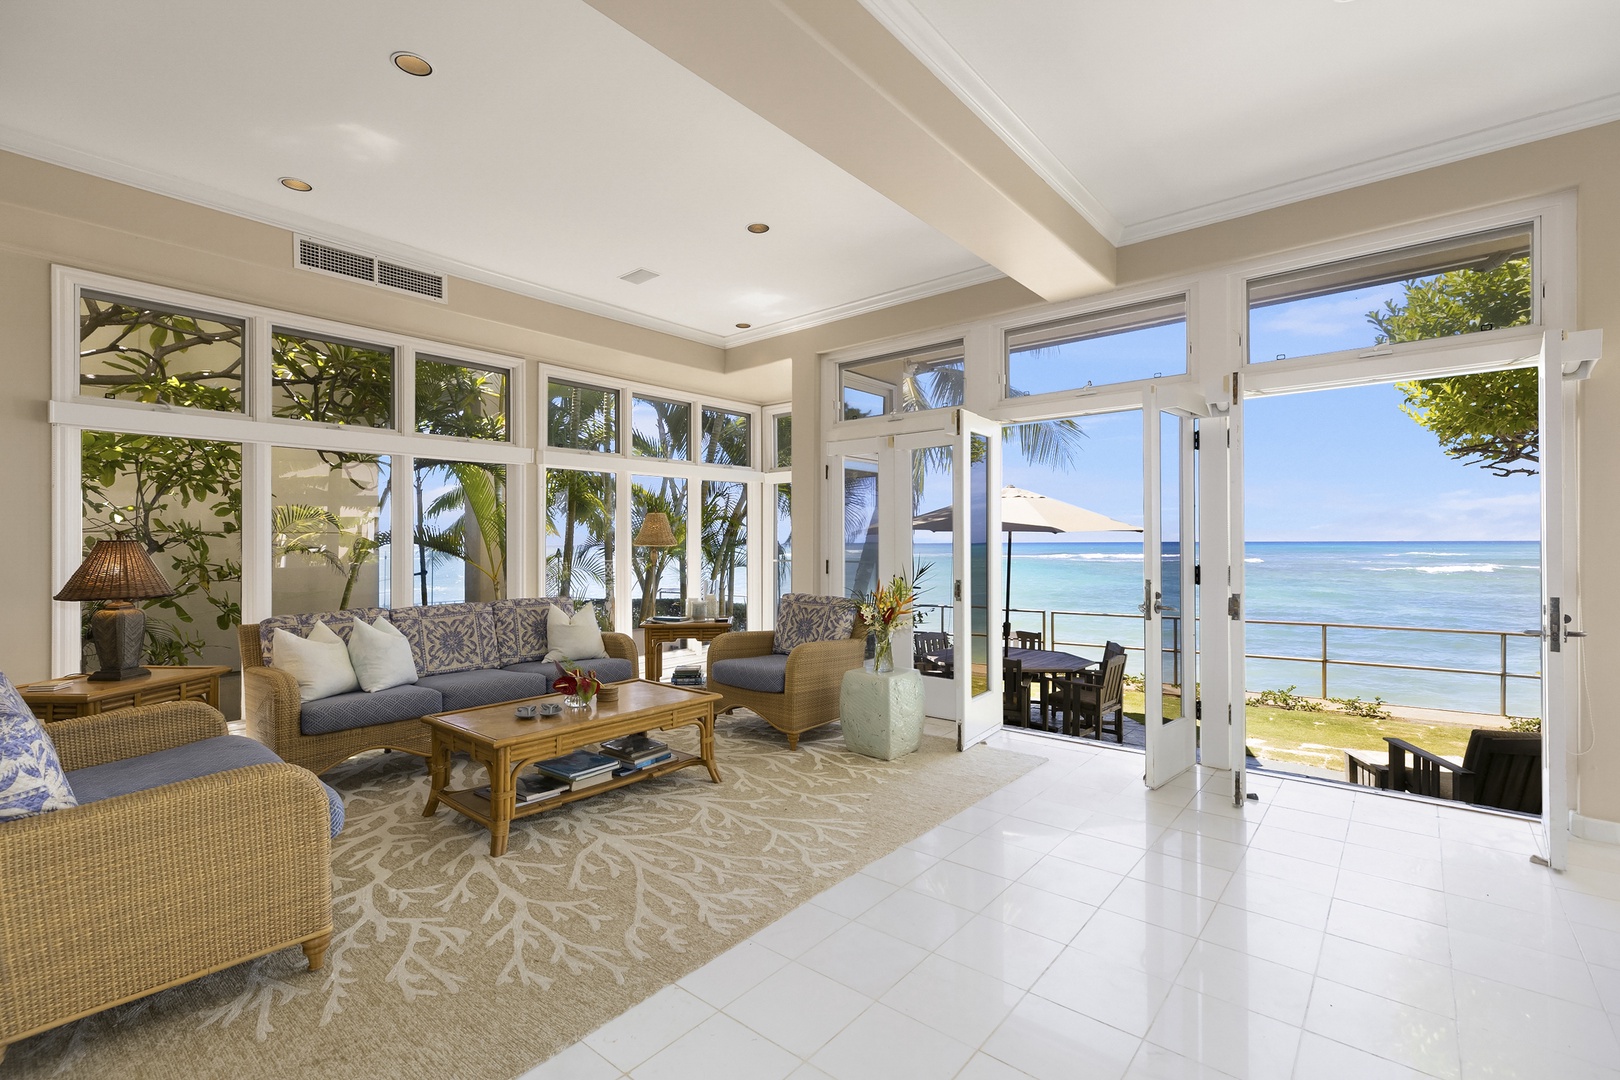 Honolulu Vacation Rentals, Diamond Head Surf House - Living Room opens up to the Oceanside Lanai and Yard.